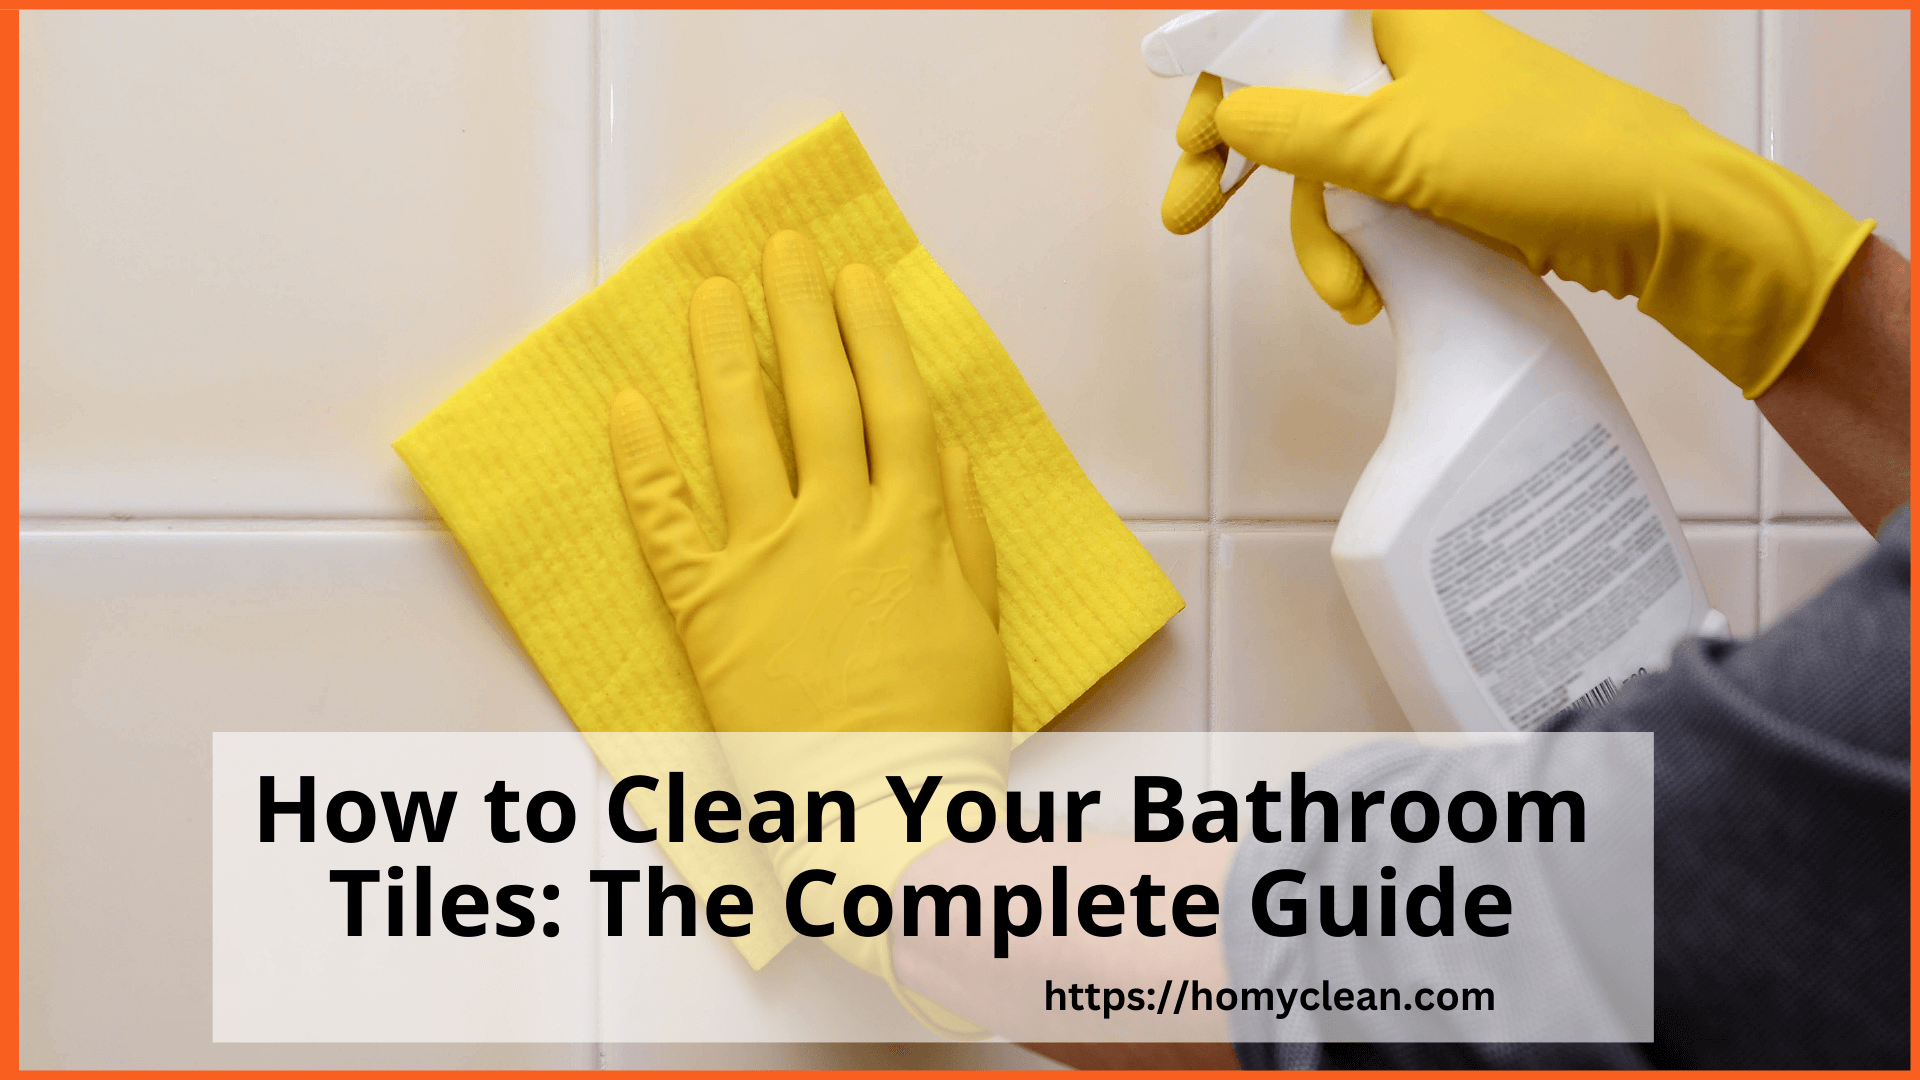 How to Clean Your Bathroom Tiles | The Complete Guide